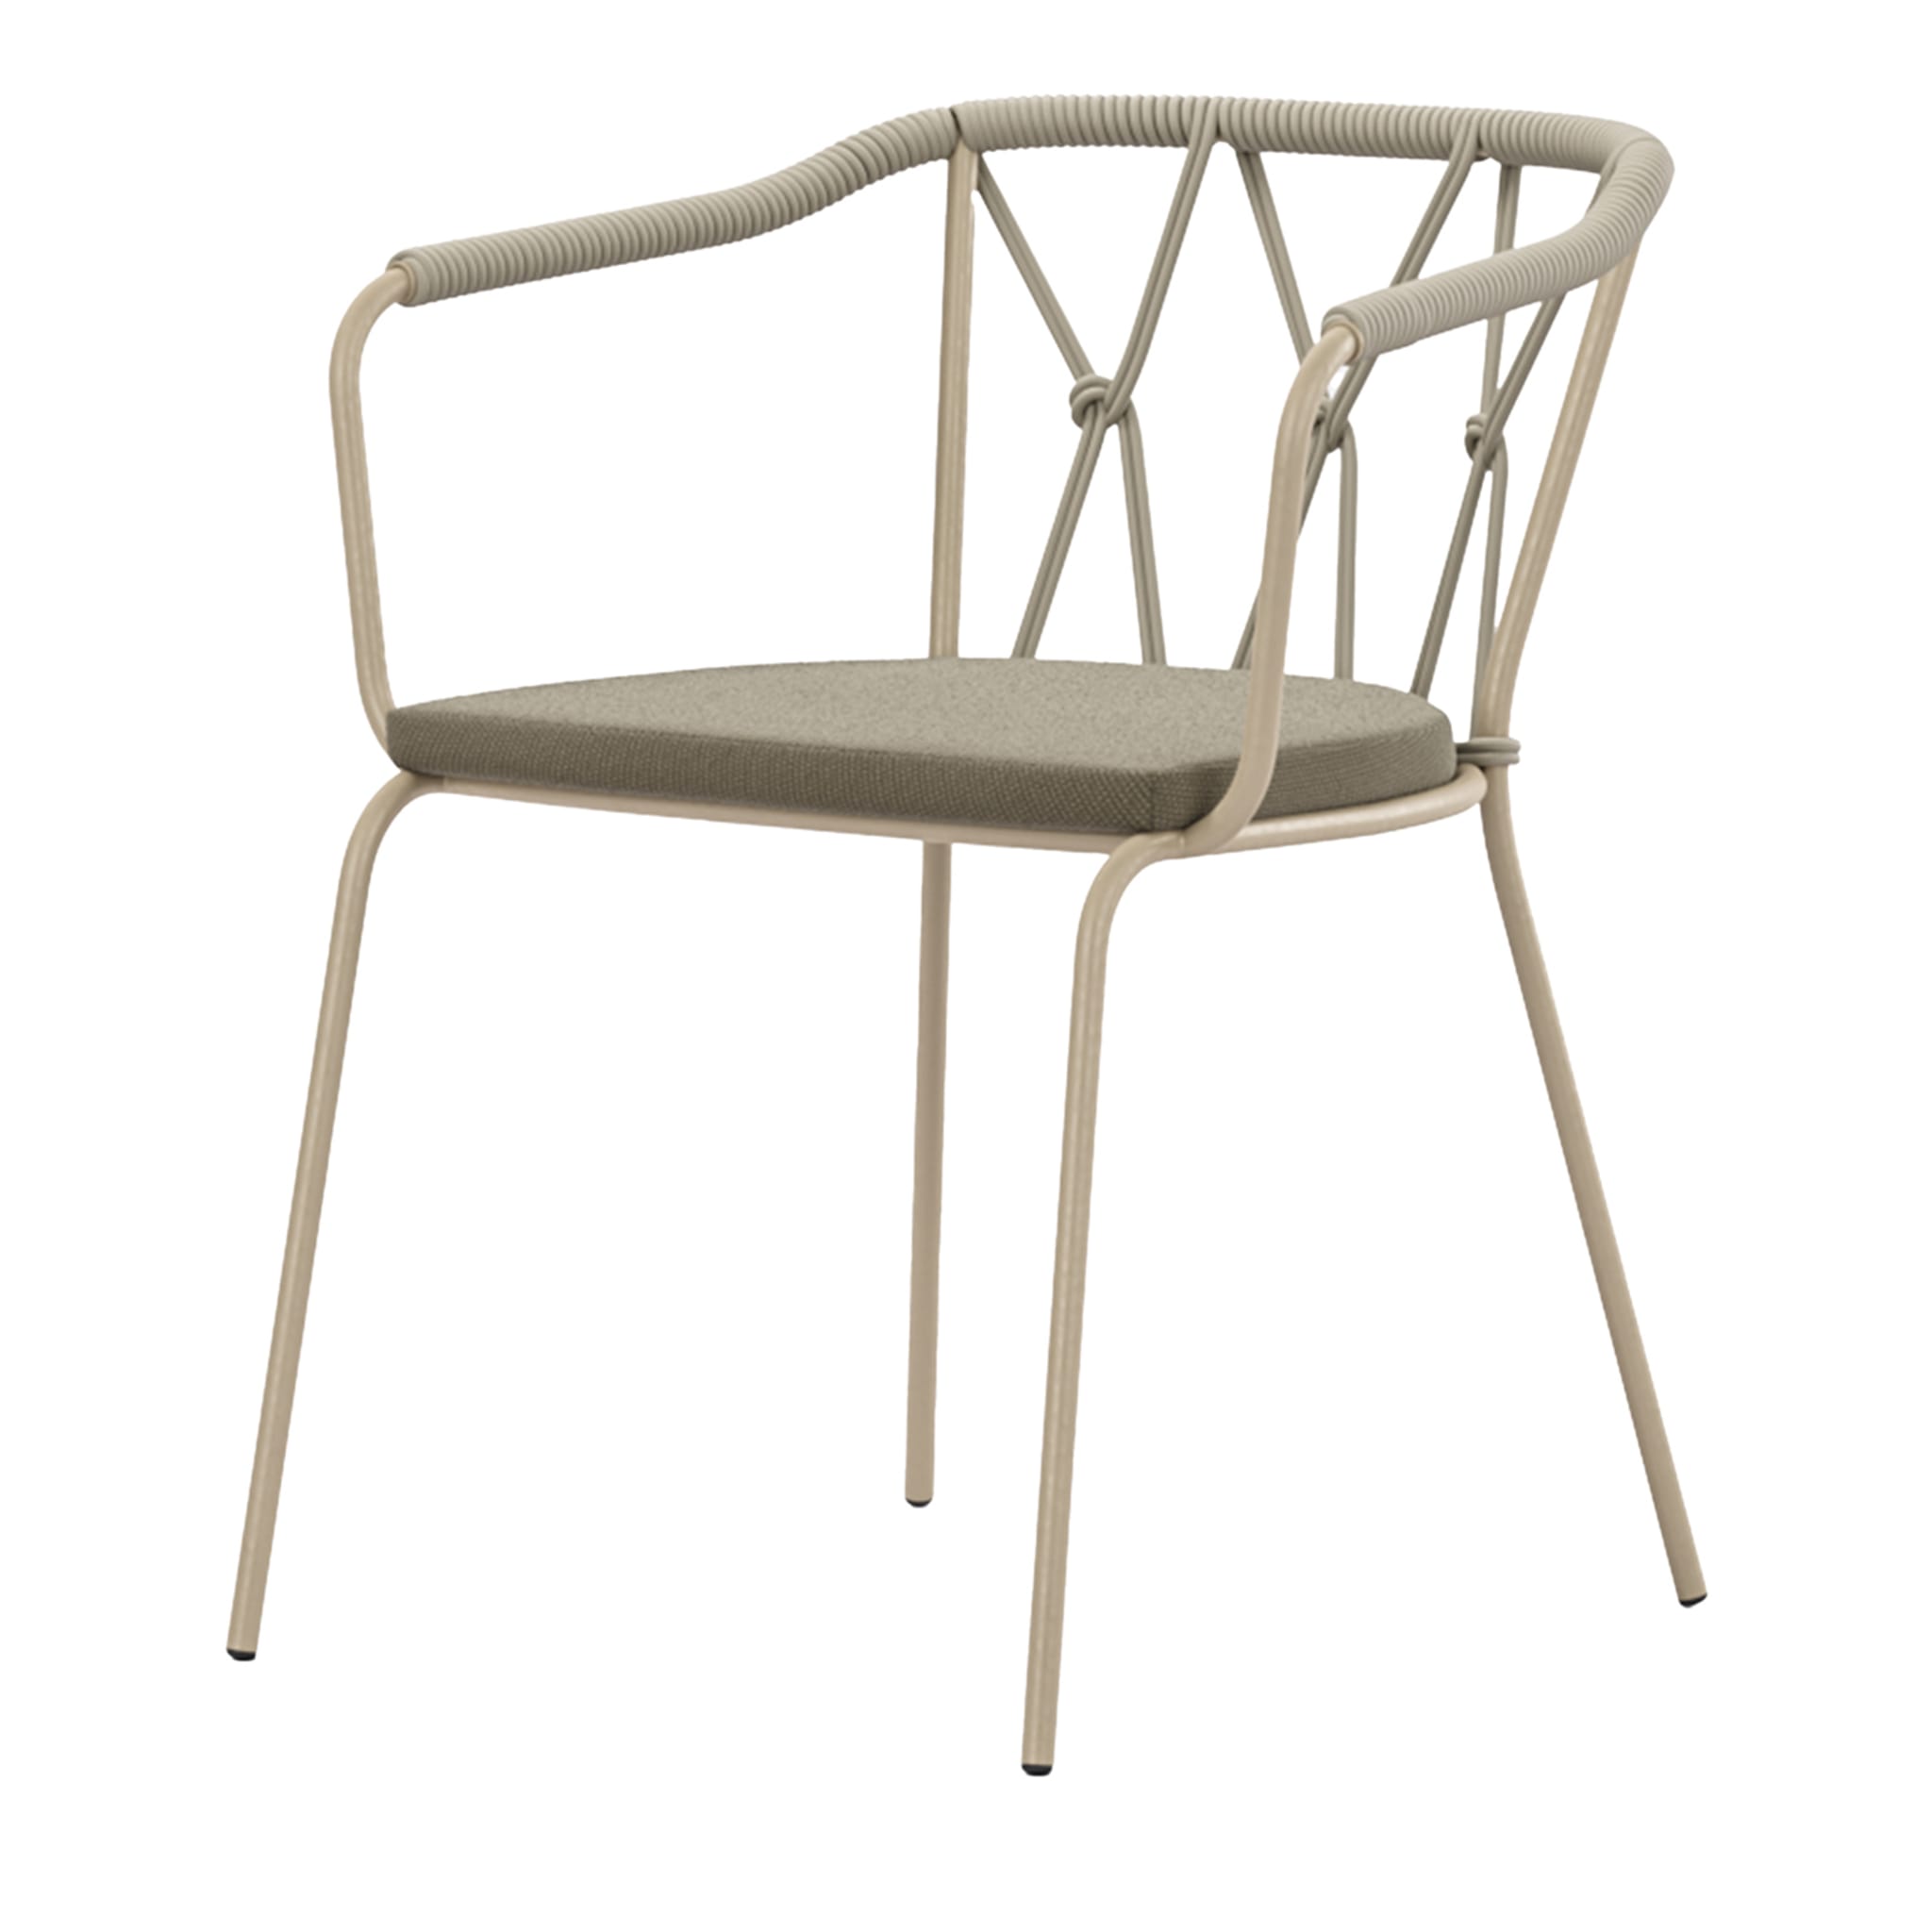 Scala Small Beige Outdoor Chair by Marco Piva - Main view